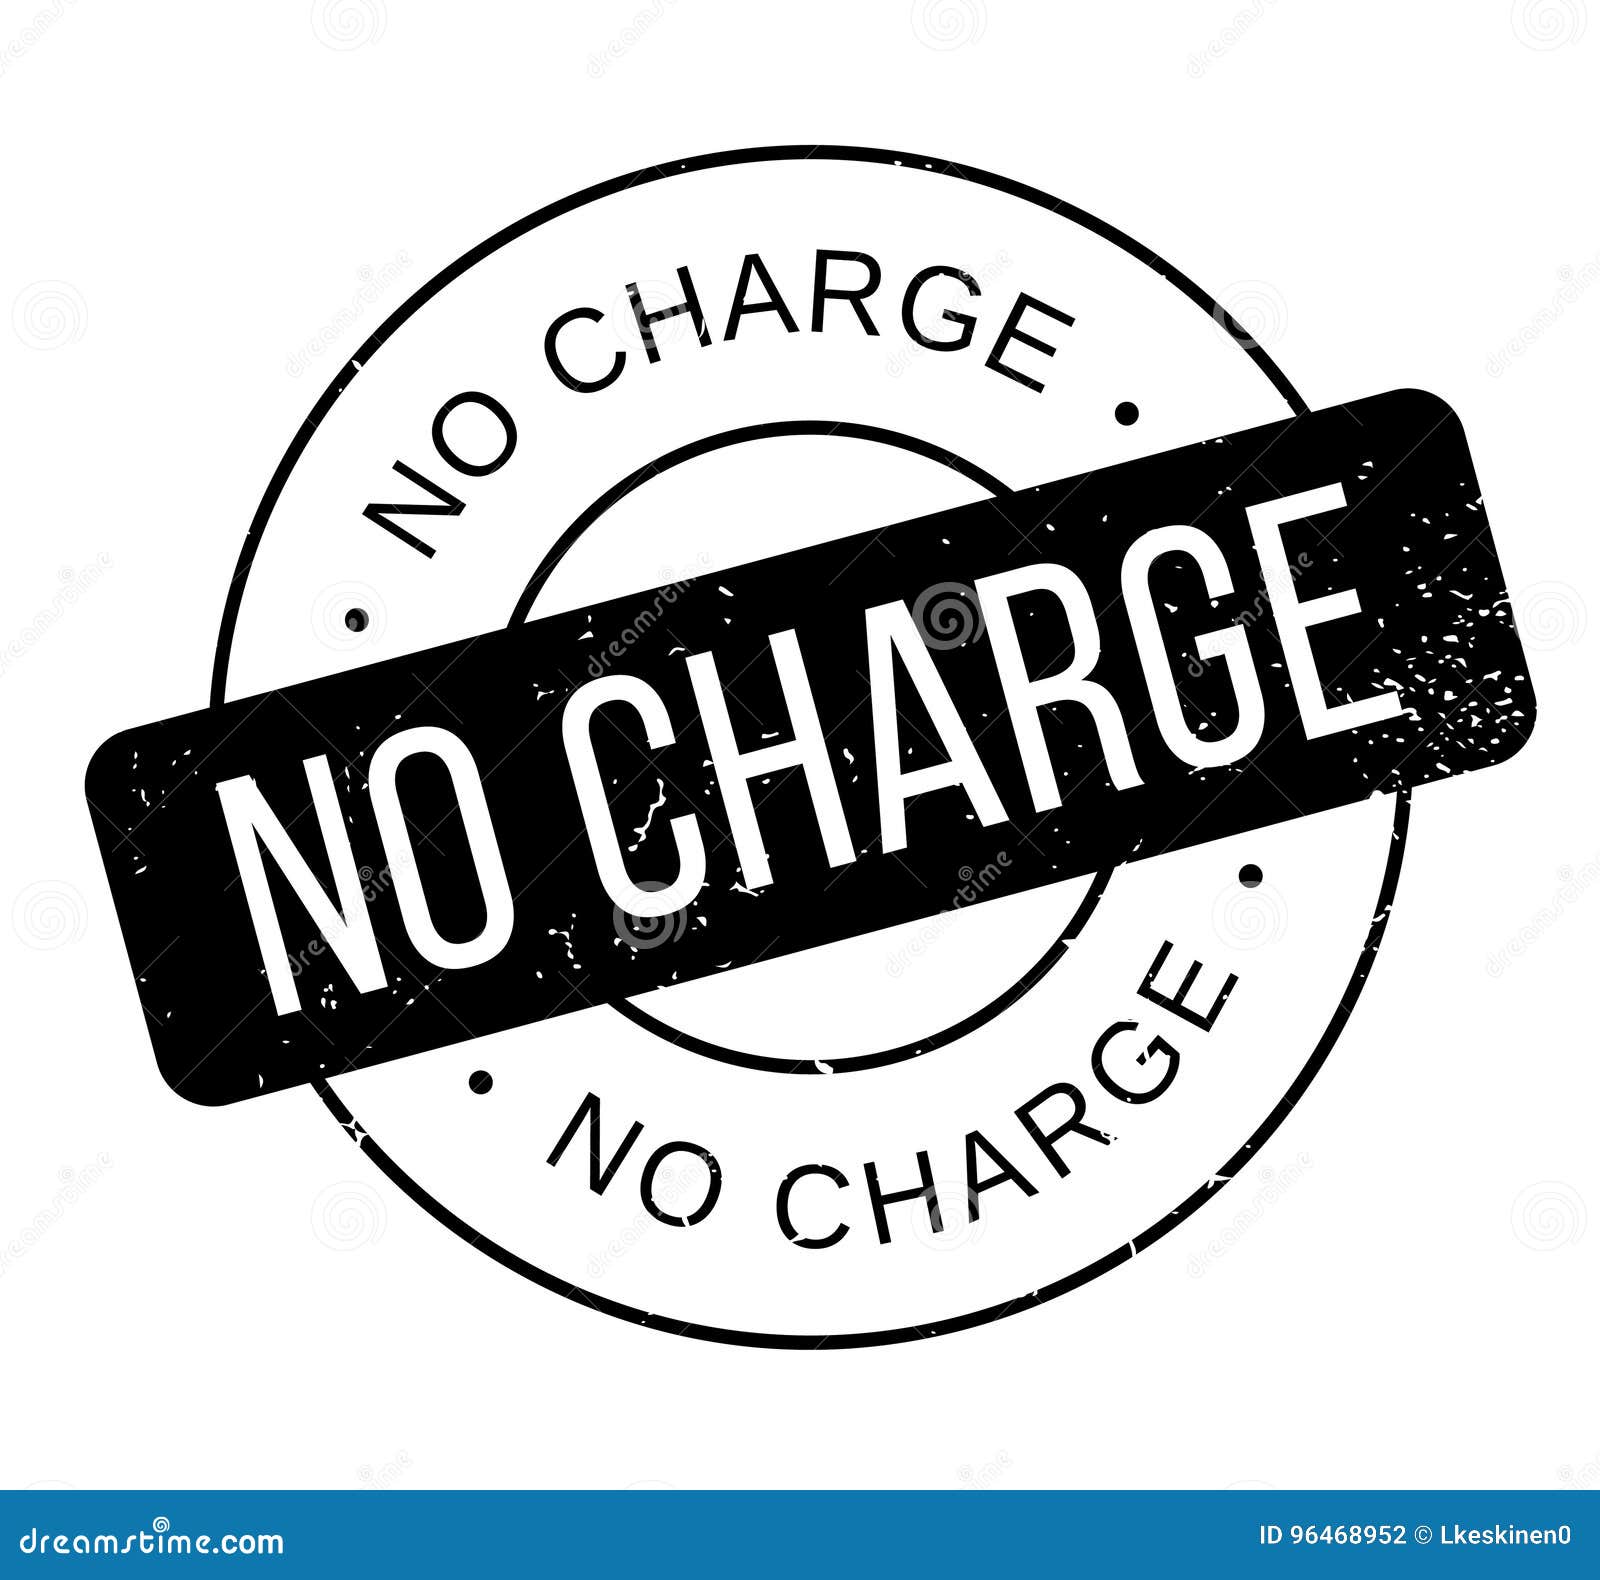 No Charge - YouTube